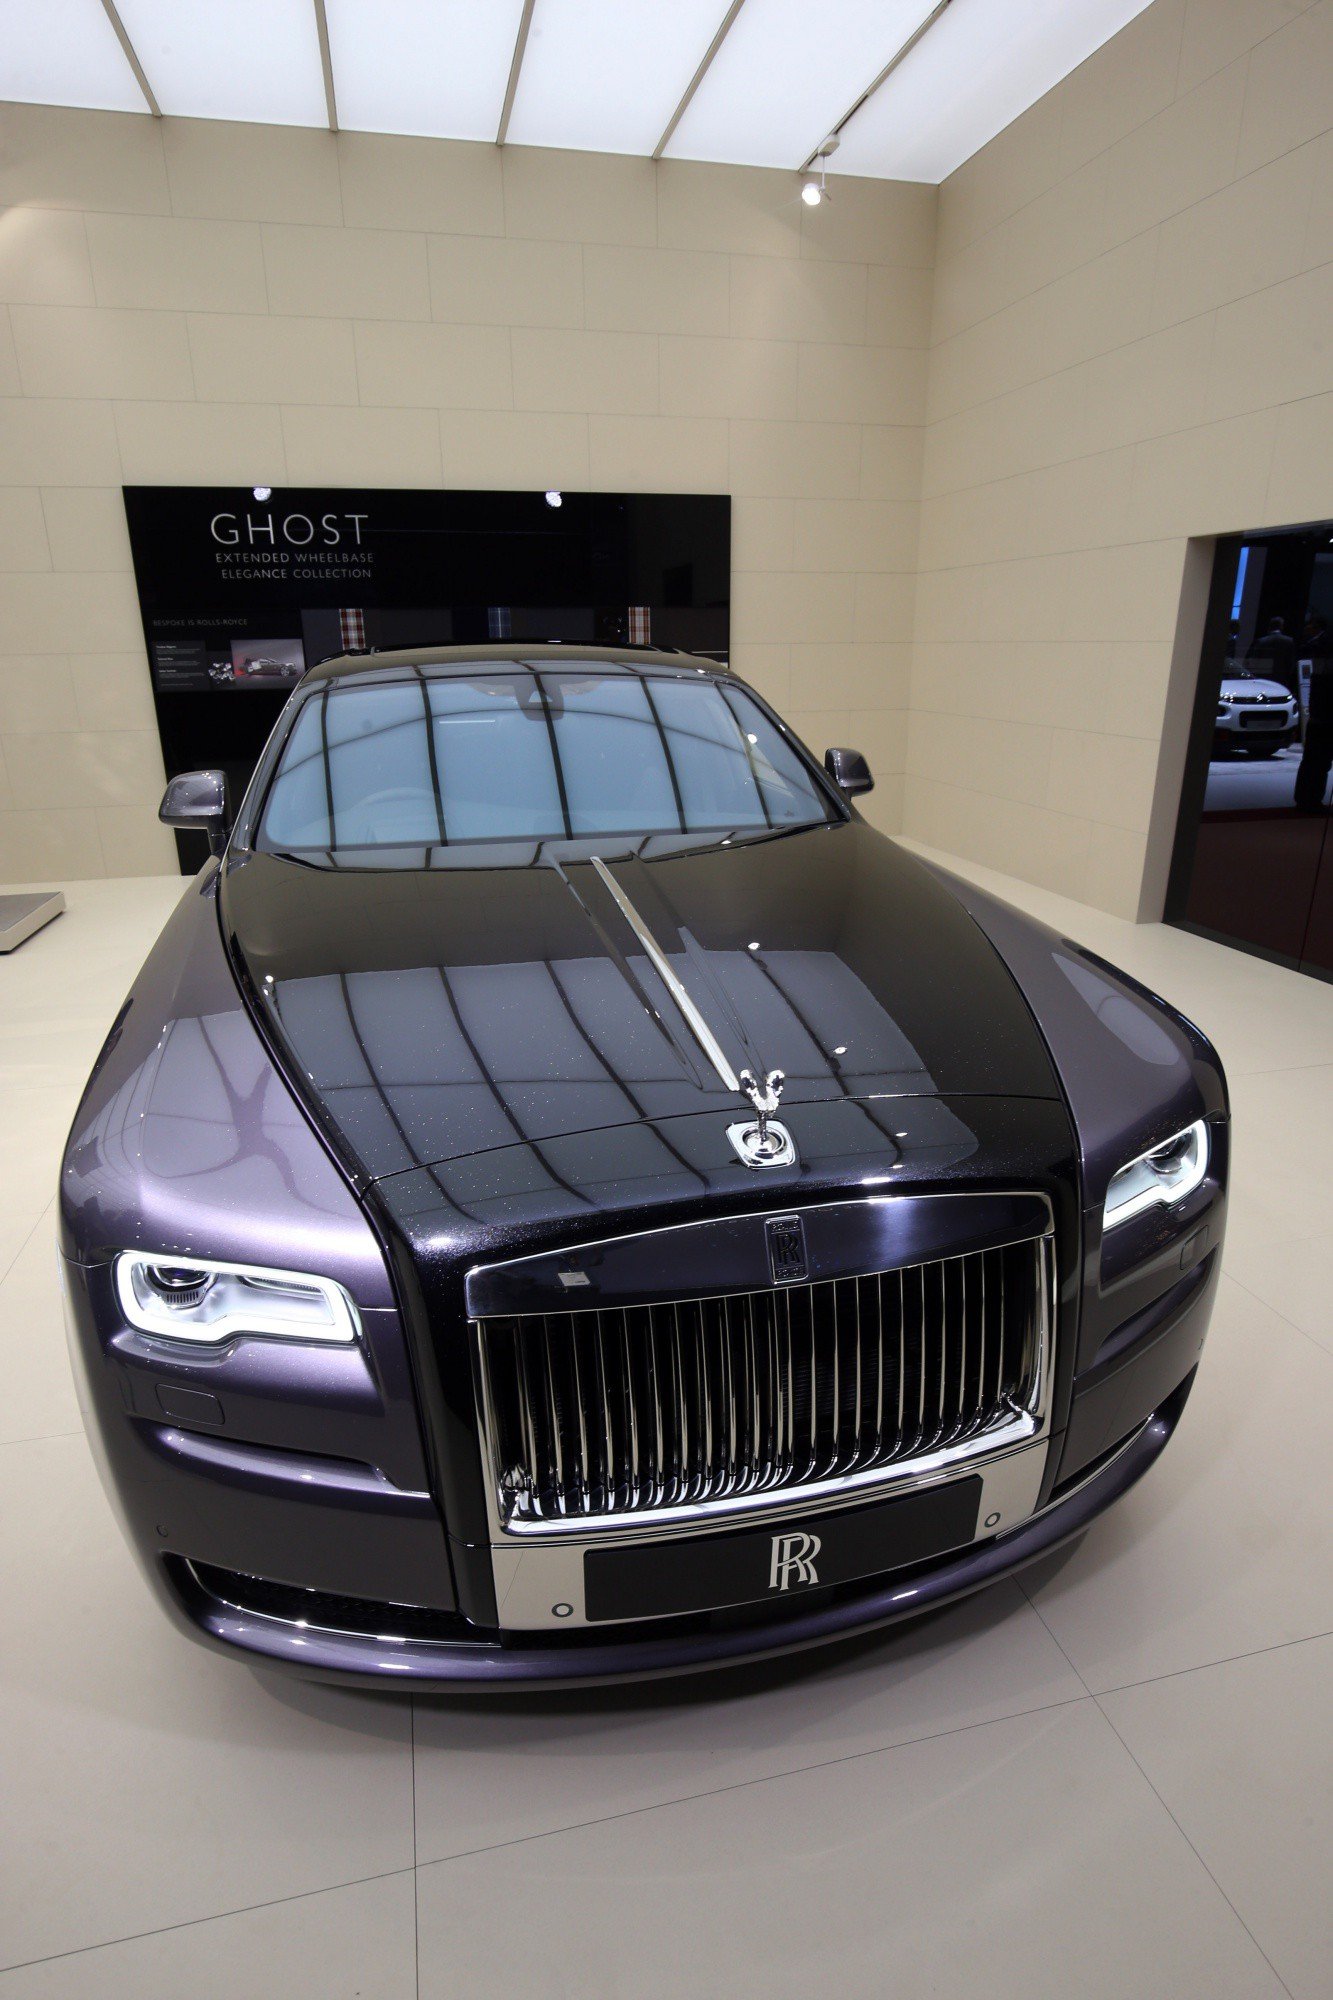 The Paint On This RollsRoyce Contains Dust From 1000 Ground Up Ethically  Sourced Diamonds